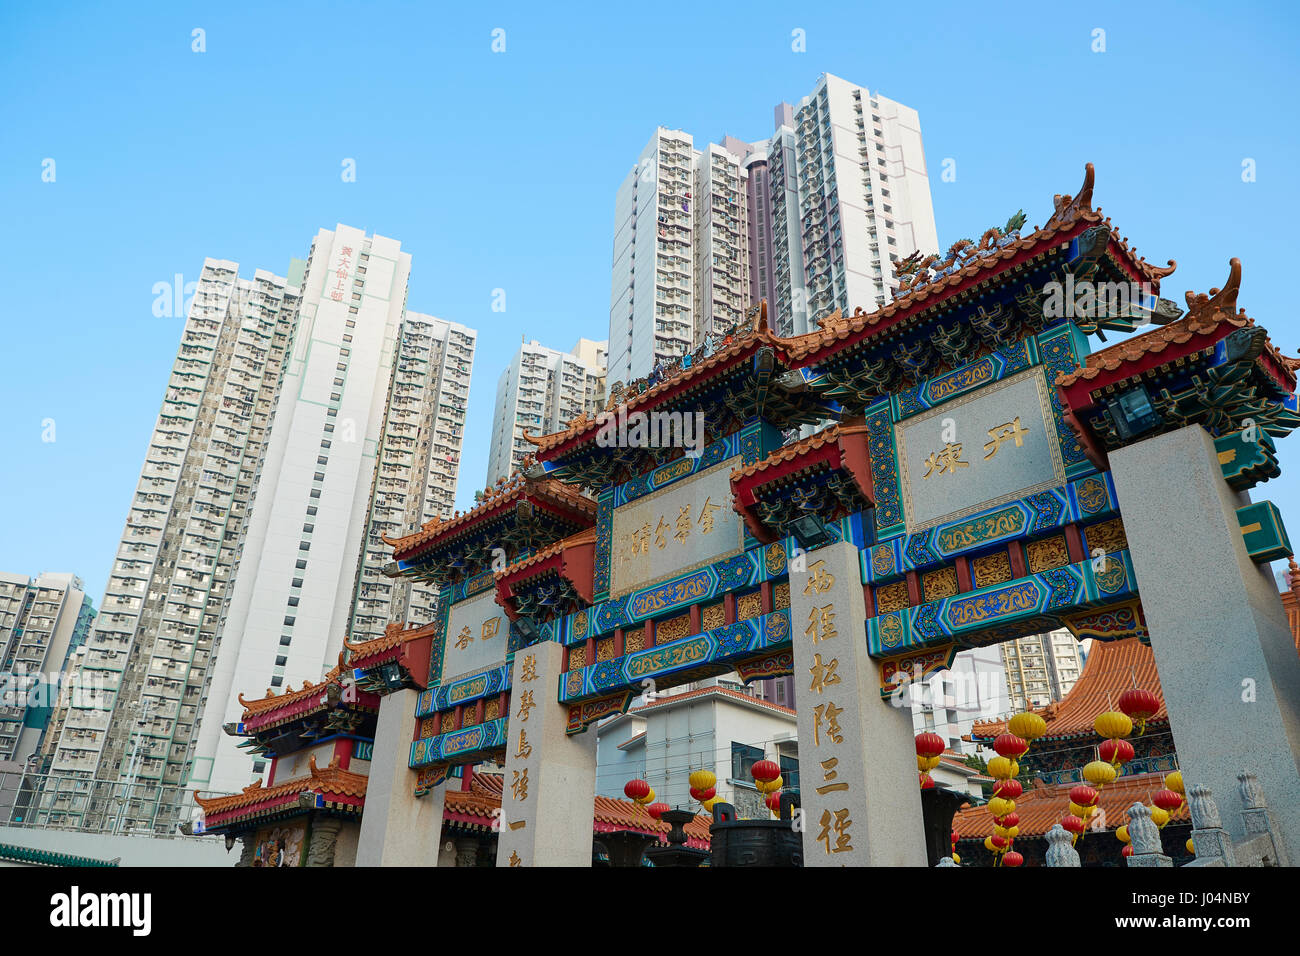 Ornate Traditional Chinese Gateway Contrasts With The Kowloon Skyline At The Wong Tai Sin Temple, Hong Kong. Stock Photo